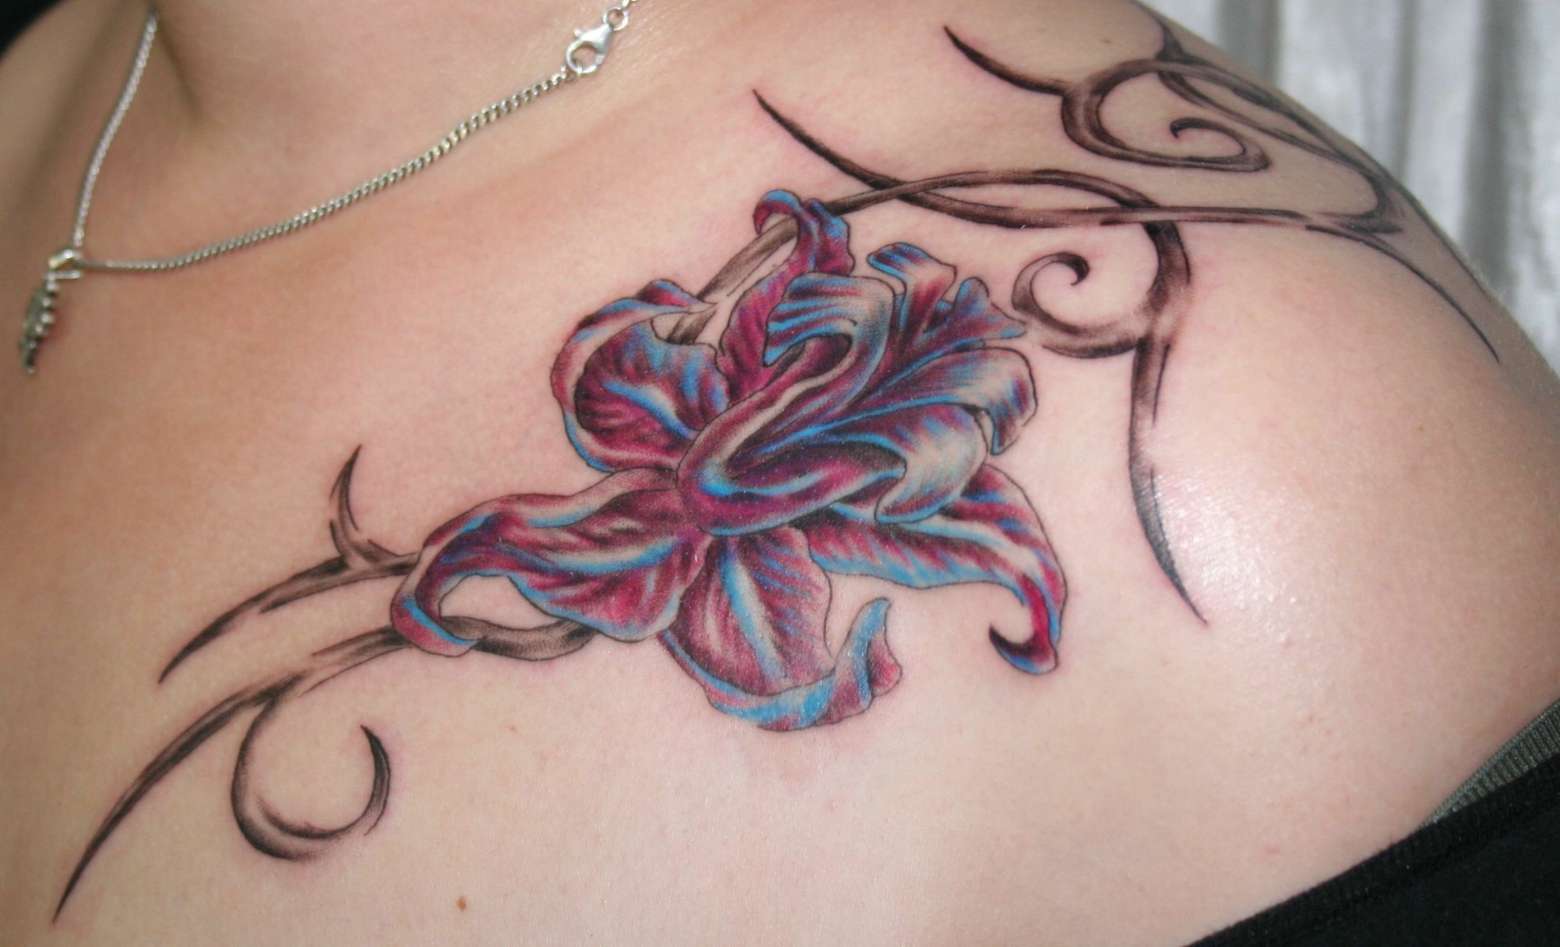 Tattoo motif flowers in shoulder pain Tattoo stains in summer